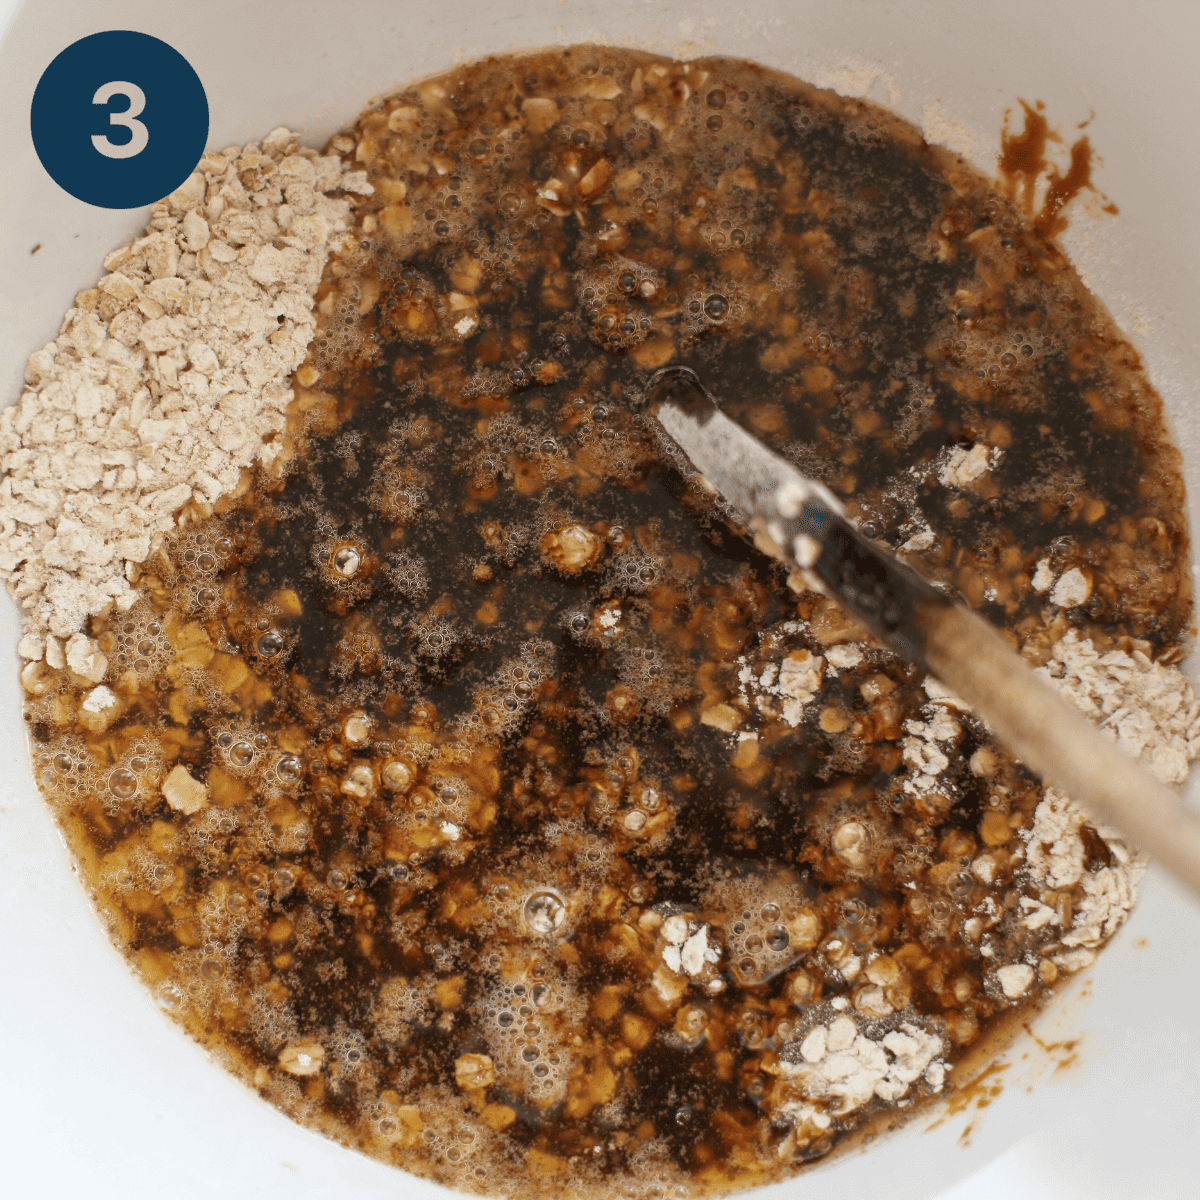 Adding the melted butter and sugar to the oatmeal mixture.